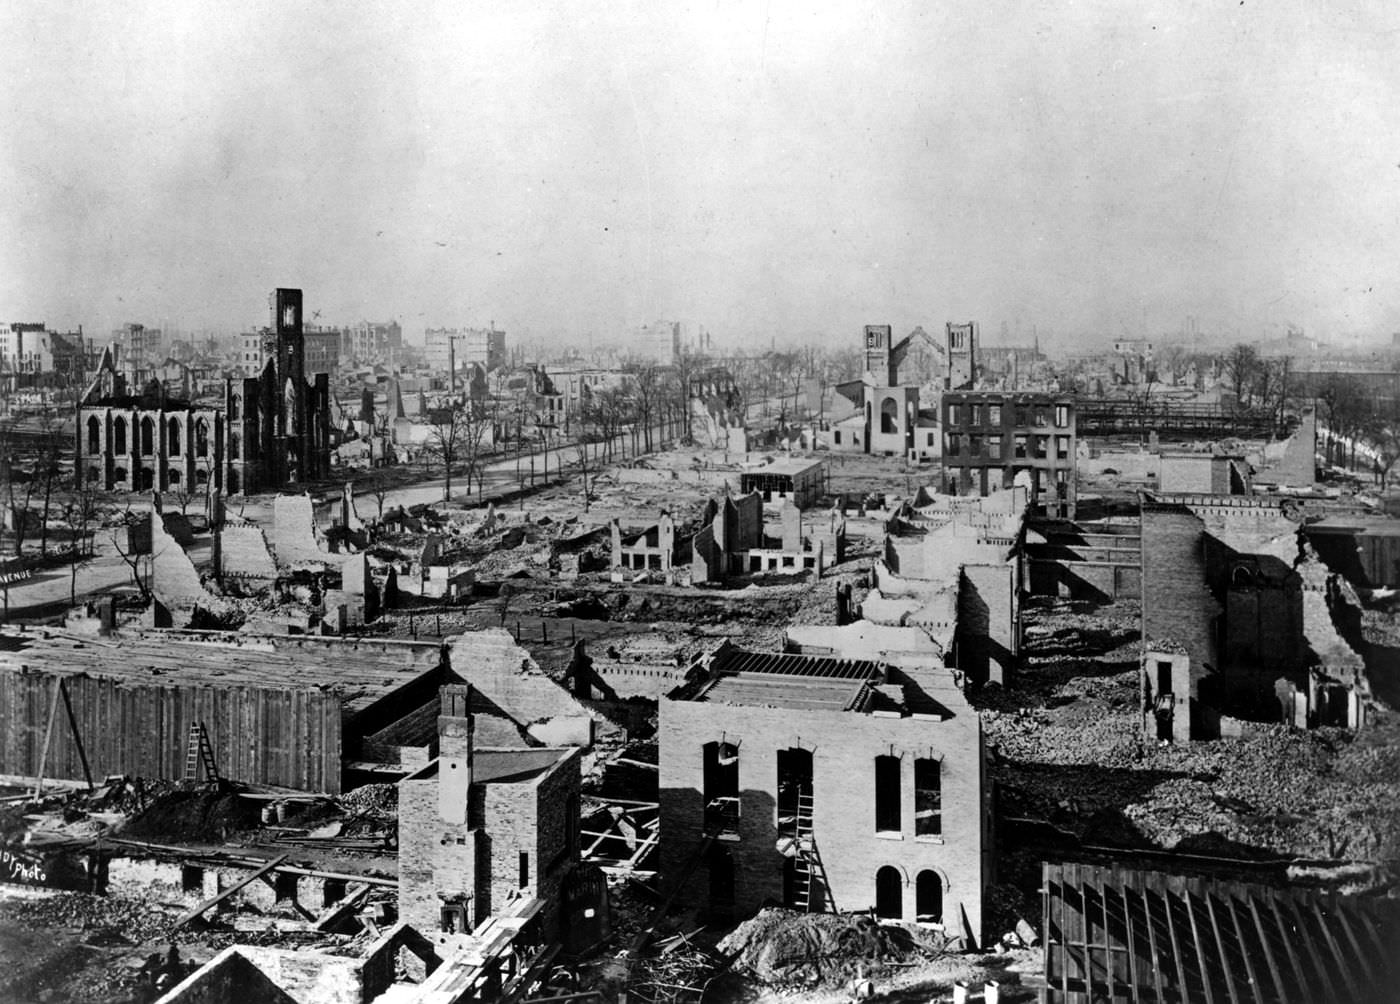 Looking north across what is now the Loop after the Great Chicago Fire of 1871.